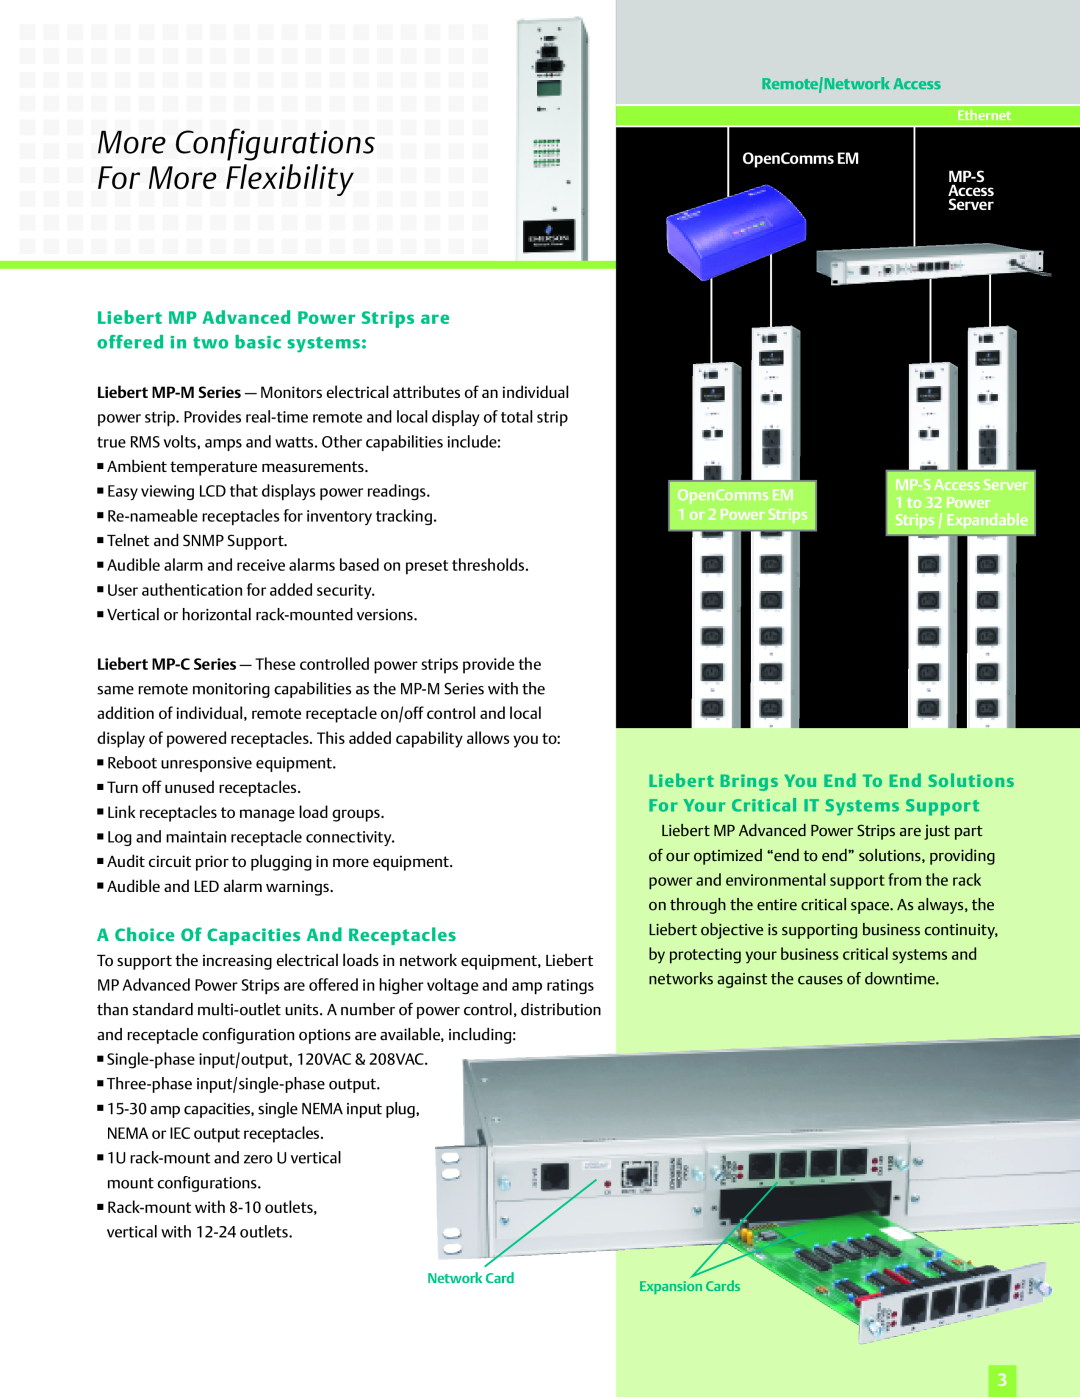 Emerson AC Power System MoreConfigurations For More Flexibility, A Choice Of Capacities And Receptacles, OpenComms EM 